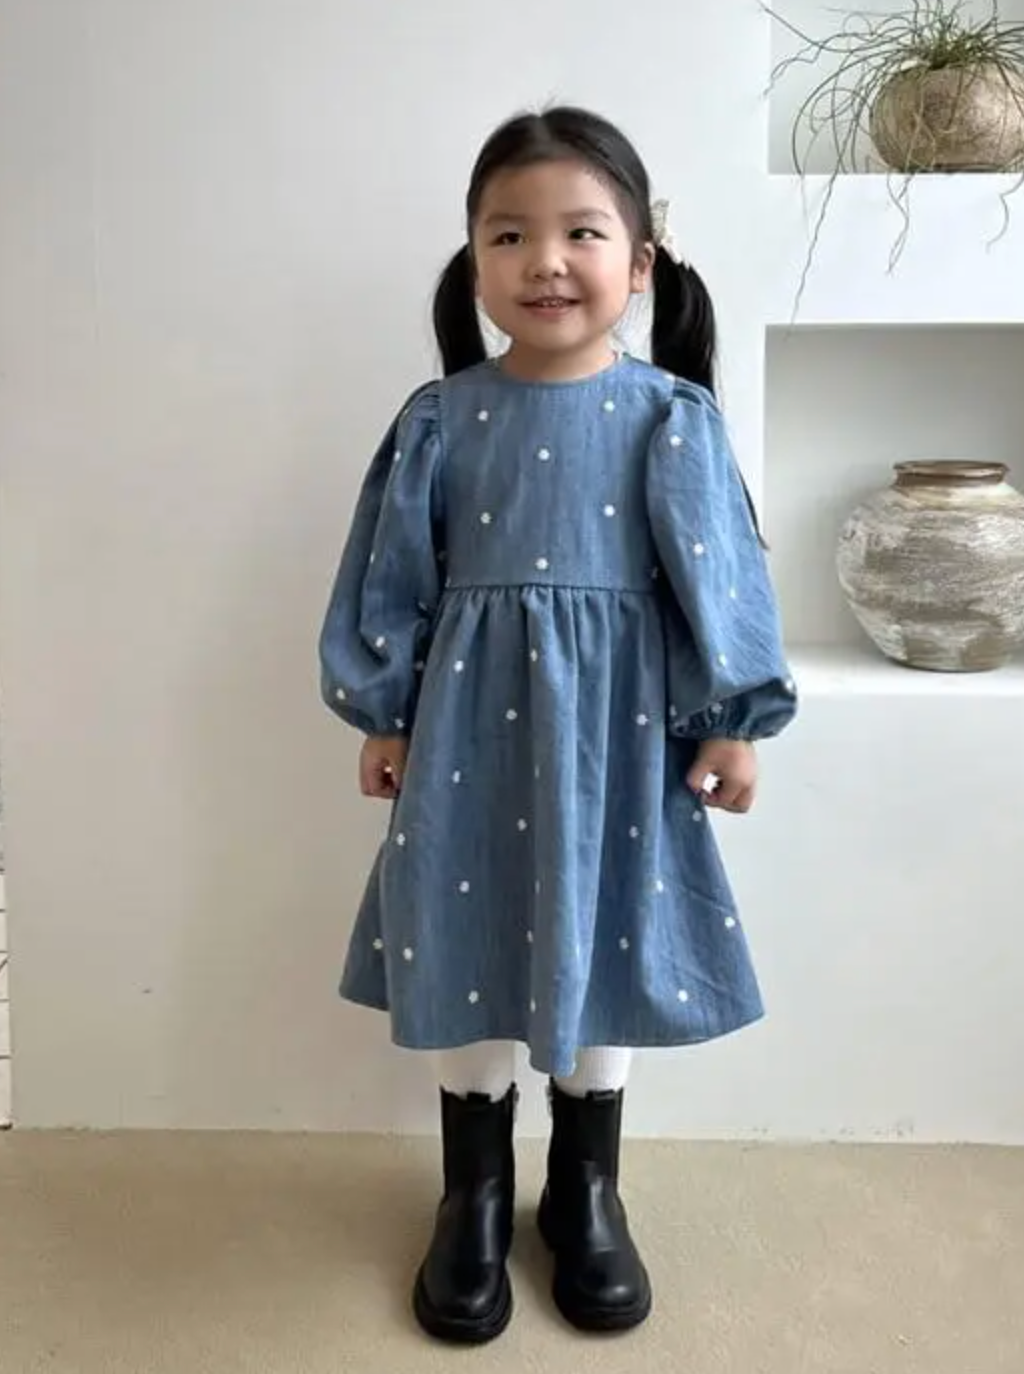 Hygge Selection - embroidery dress - denim